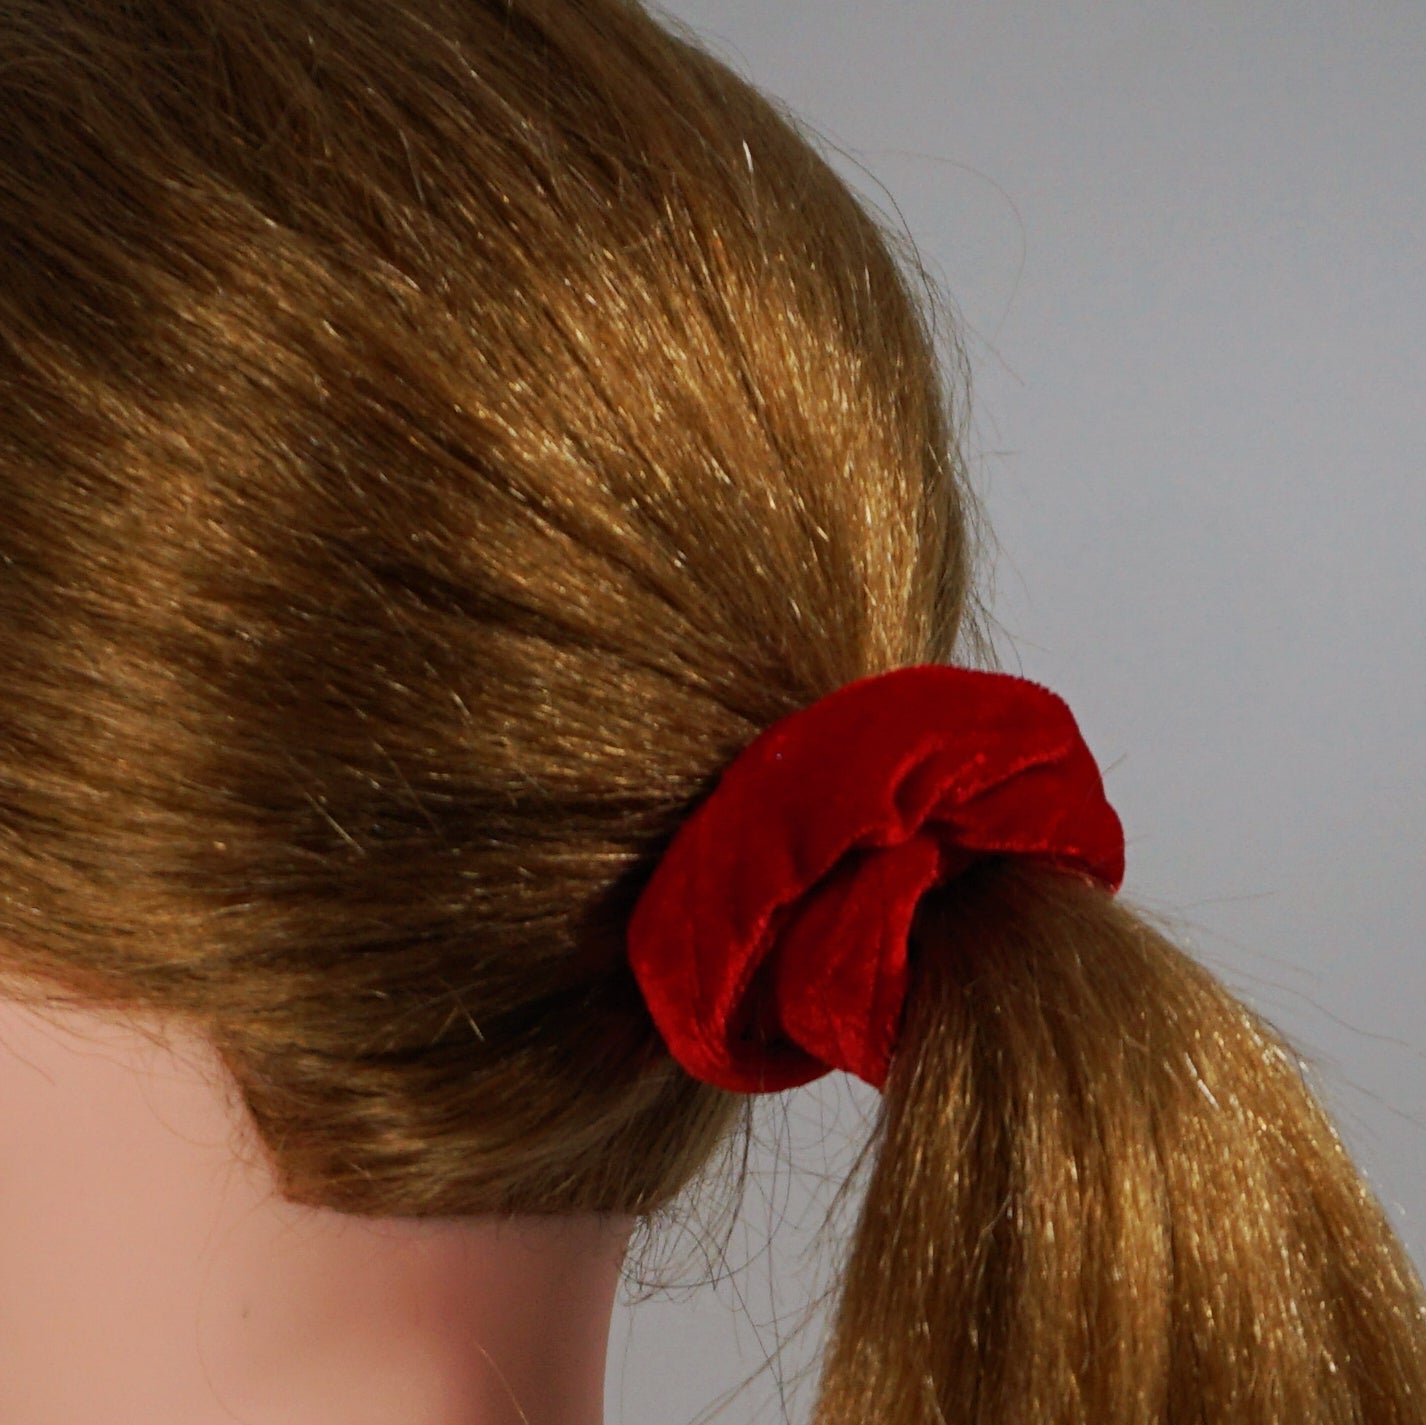 Amelia Beauty Products, Red Velvet Velvet Scrunchies, 3.5in Diameter, Gentle on Hair, Strong Hold, No Snag, No Dents or Creases. 8 Pack